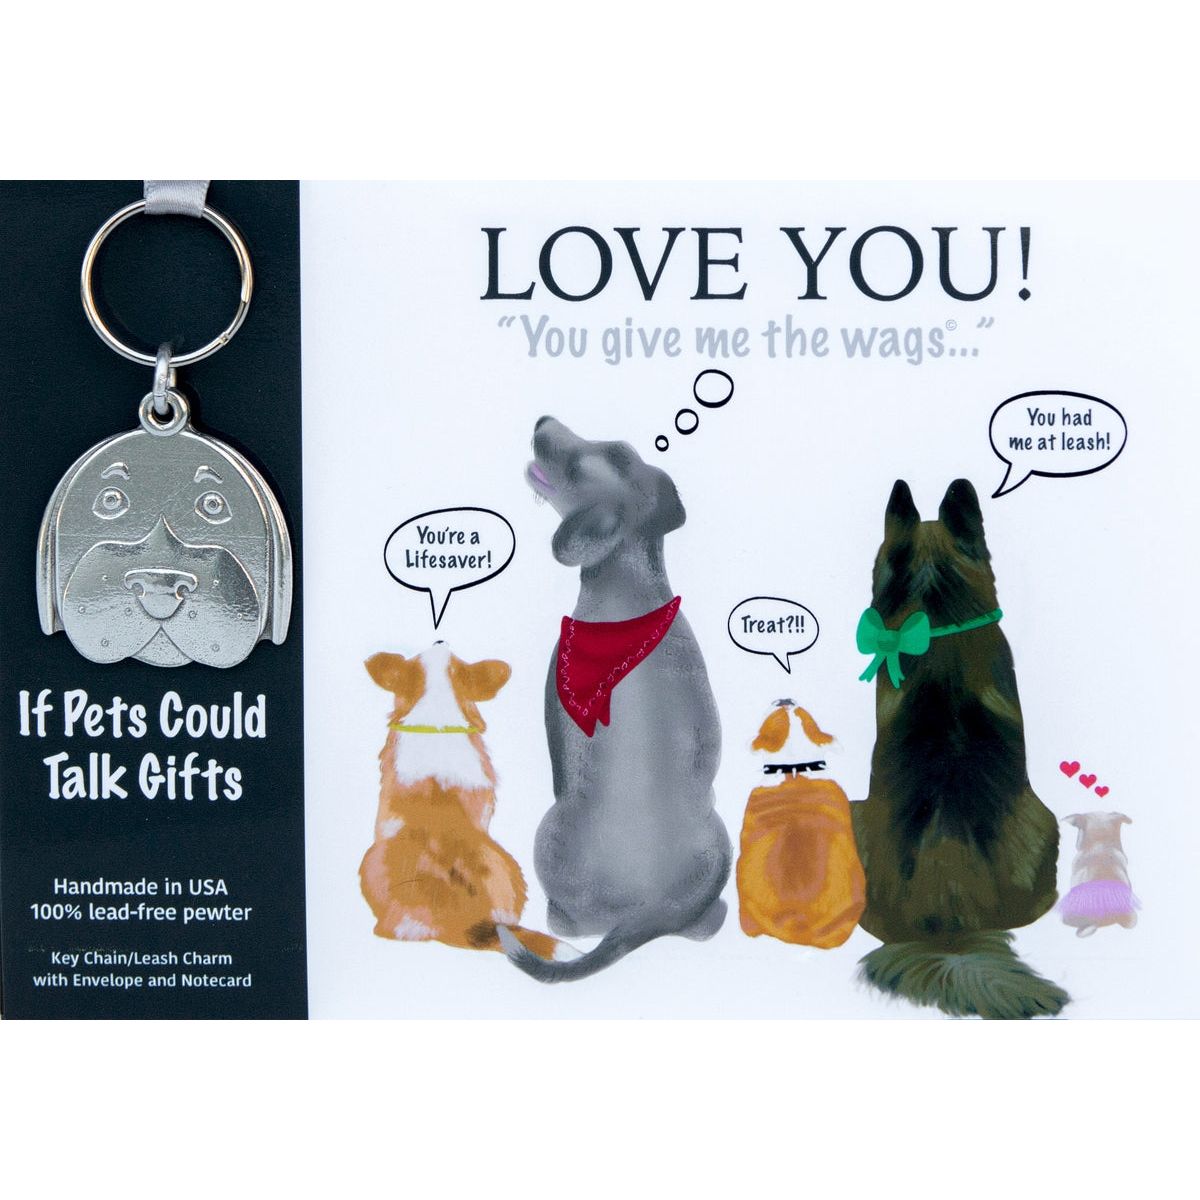 Pewter keychain in shape of a dog's face packaged with a "Love You" card.